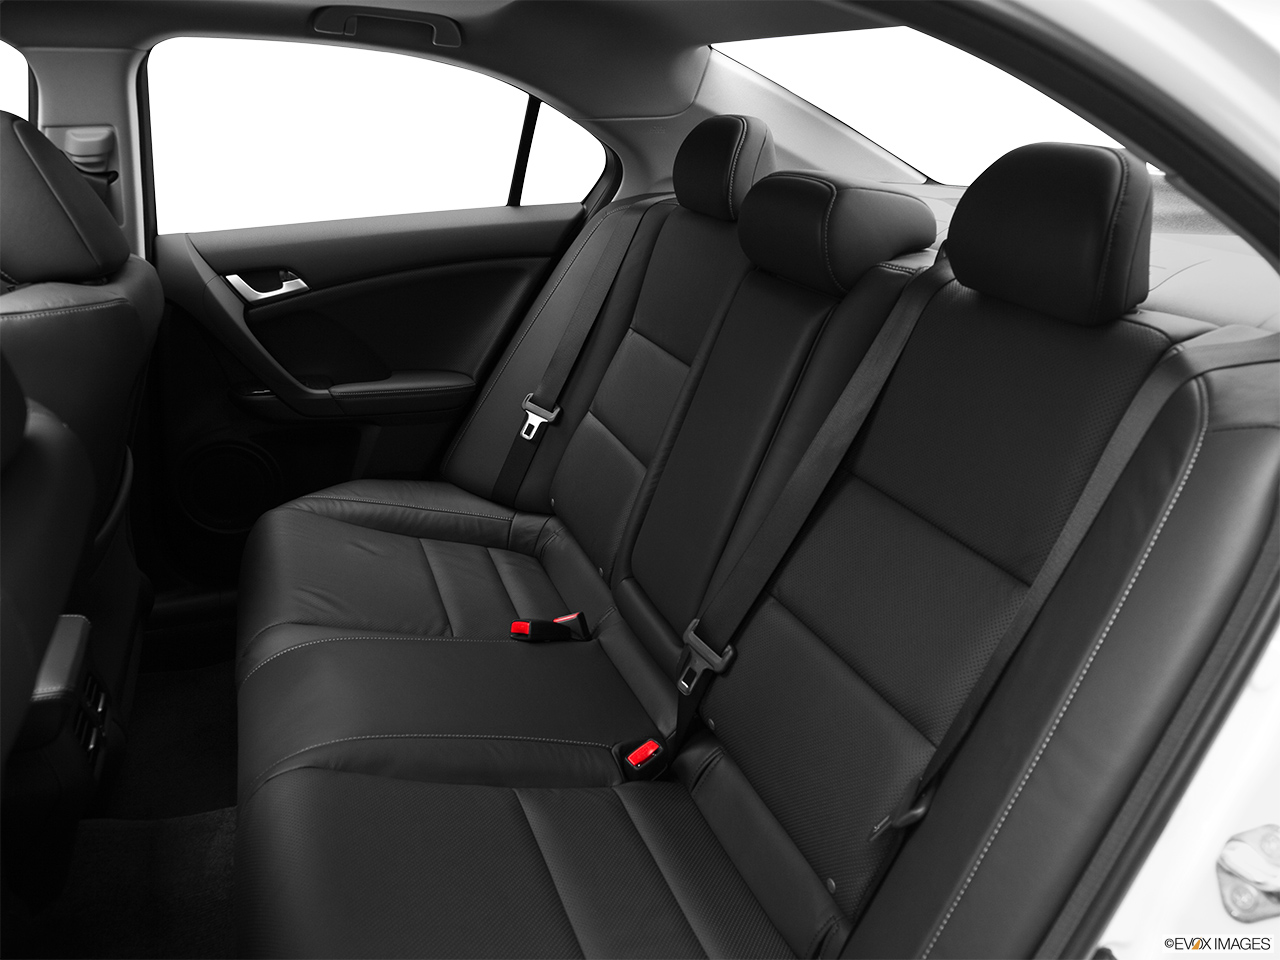 2011 Acura TSX TSX 5-speed Automatic Rear seats from Drivers Side. 